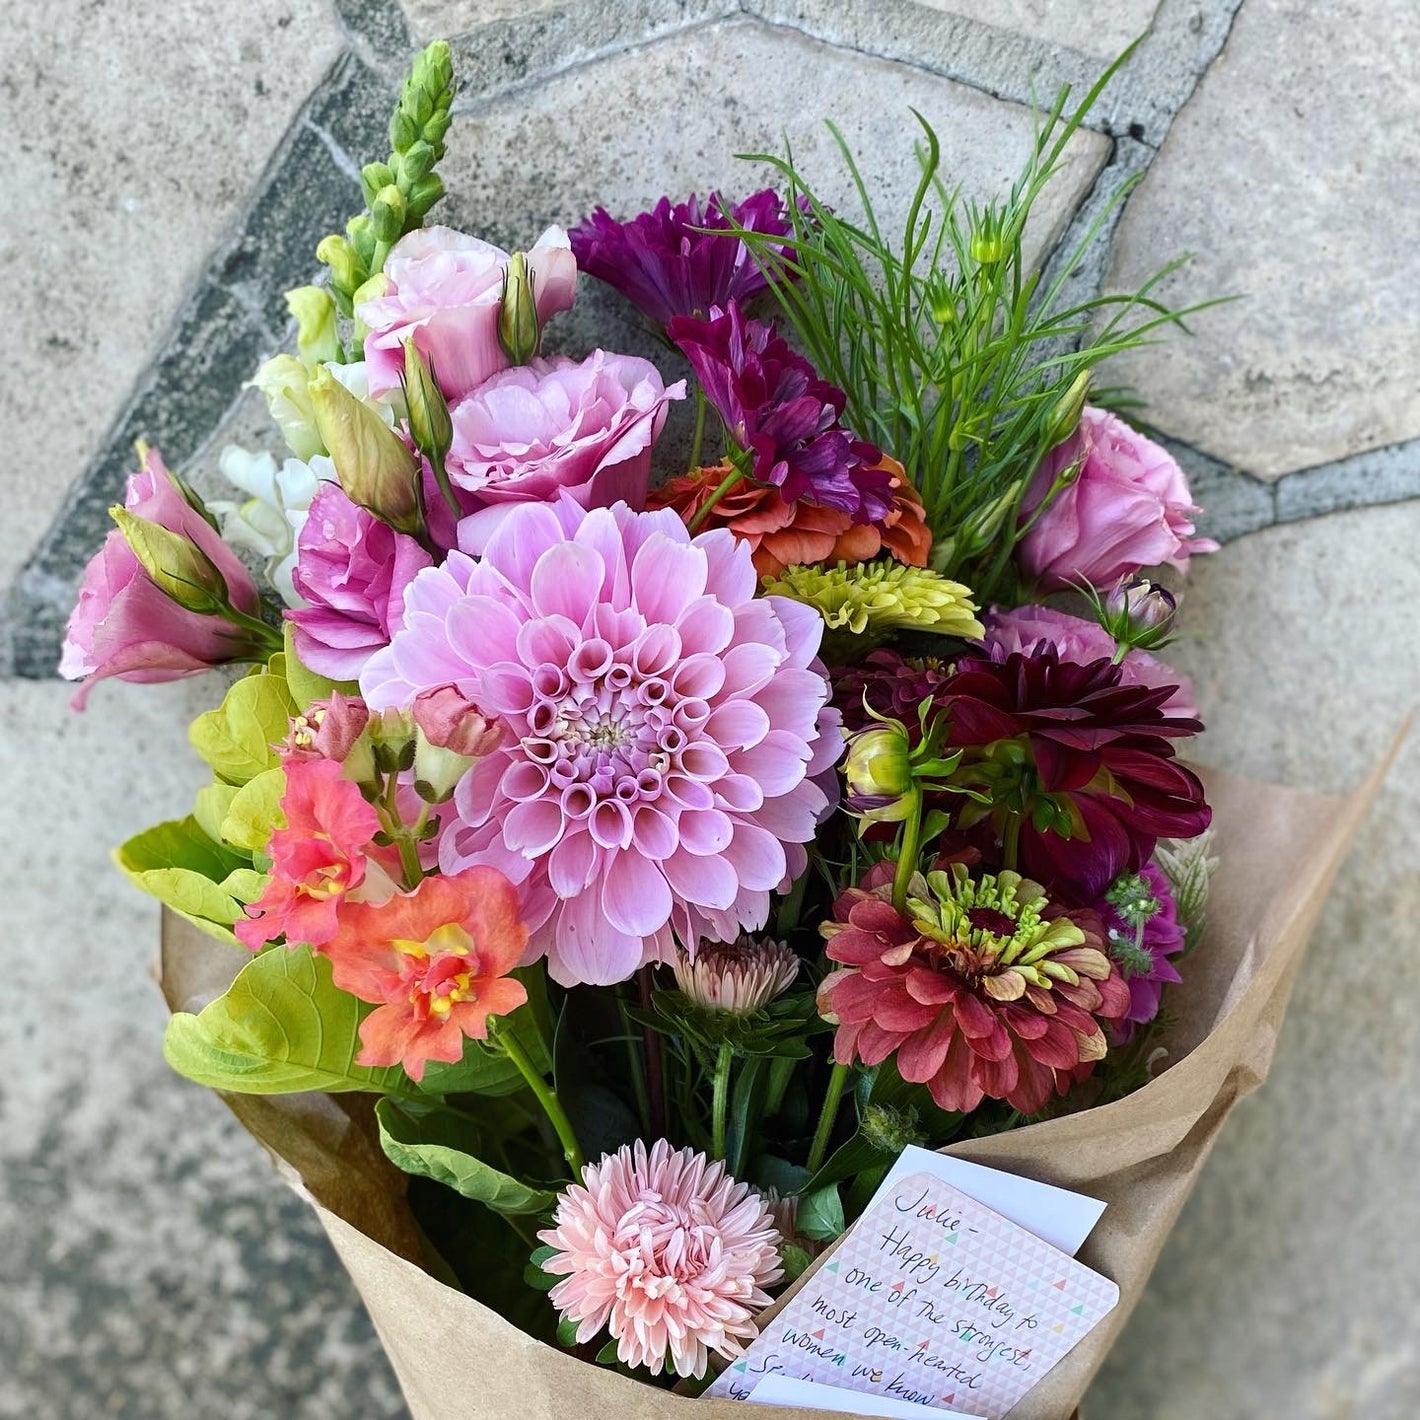 A hand tied bouquet of specialty cut flowers grown in Lindsay, Ontario